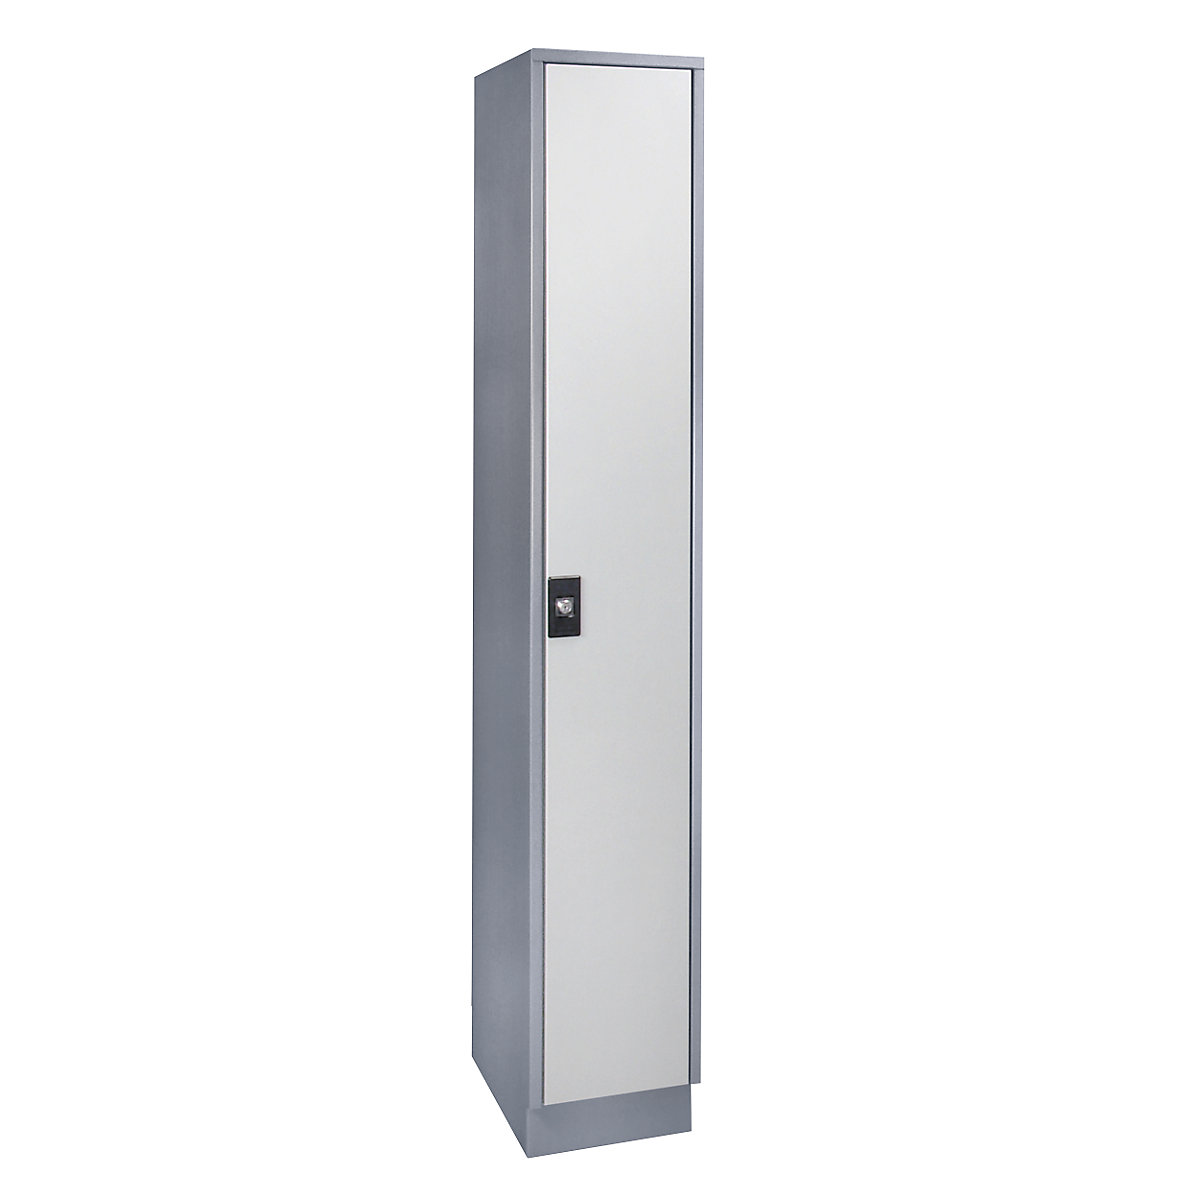 Cloakroom locker – Wolf, 1 x 300 mm wide compartment, silver grey / light grey-5